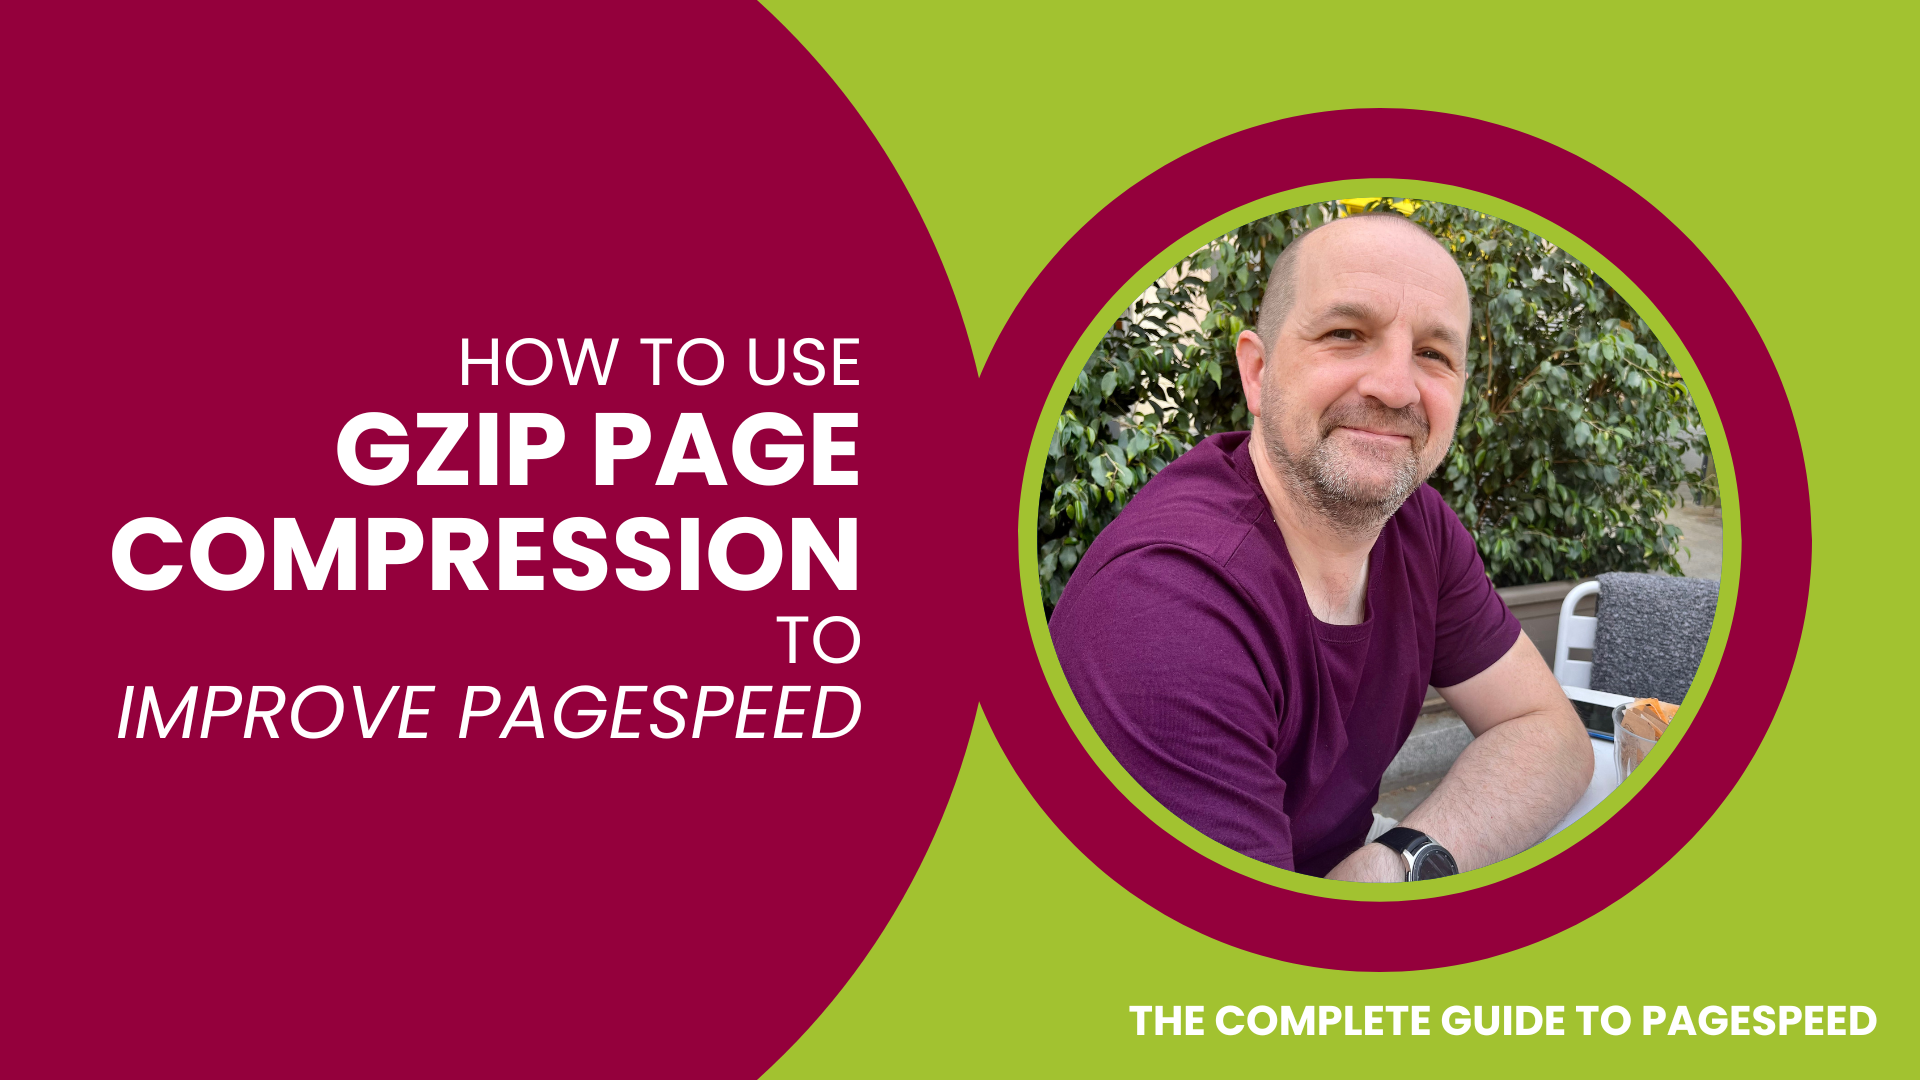 How to Use GZIP Page Compression to Improve Pagespeed